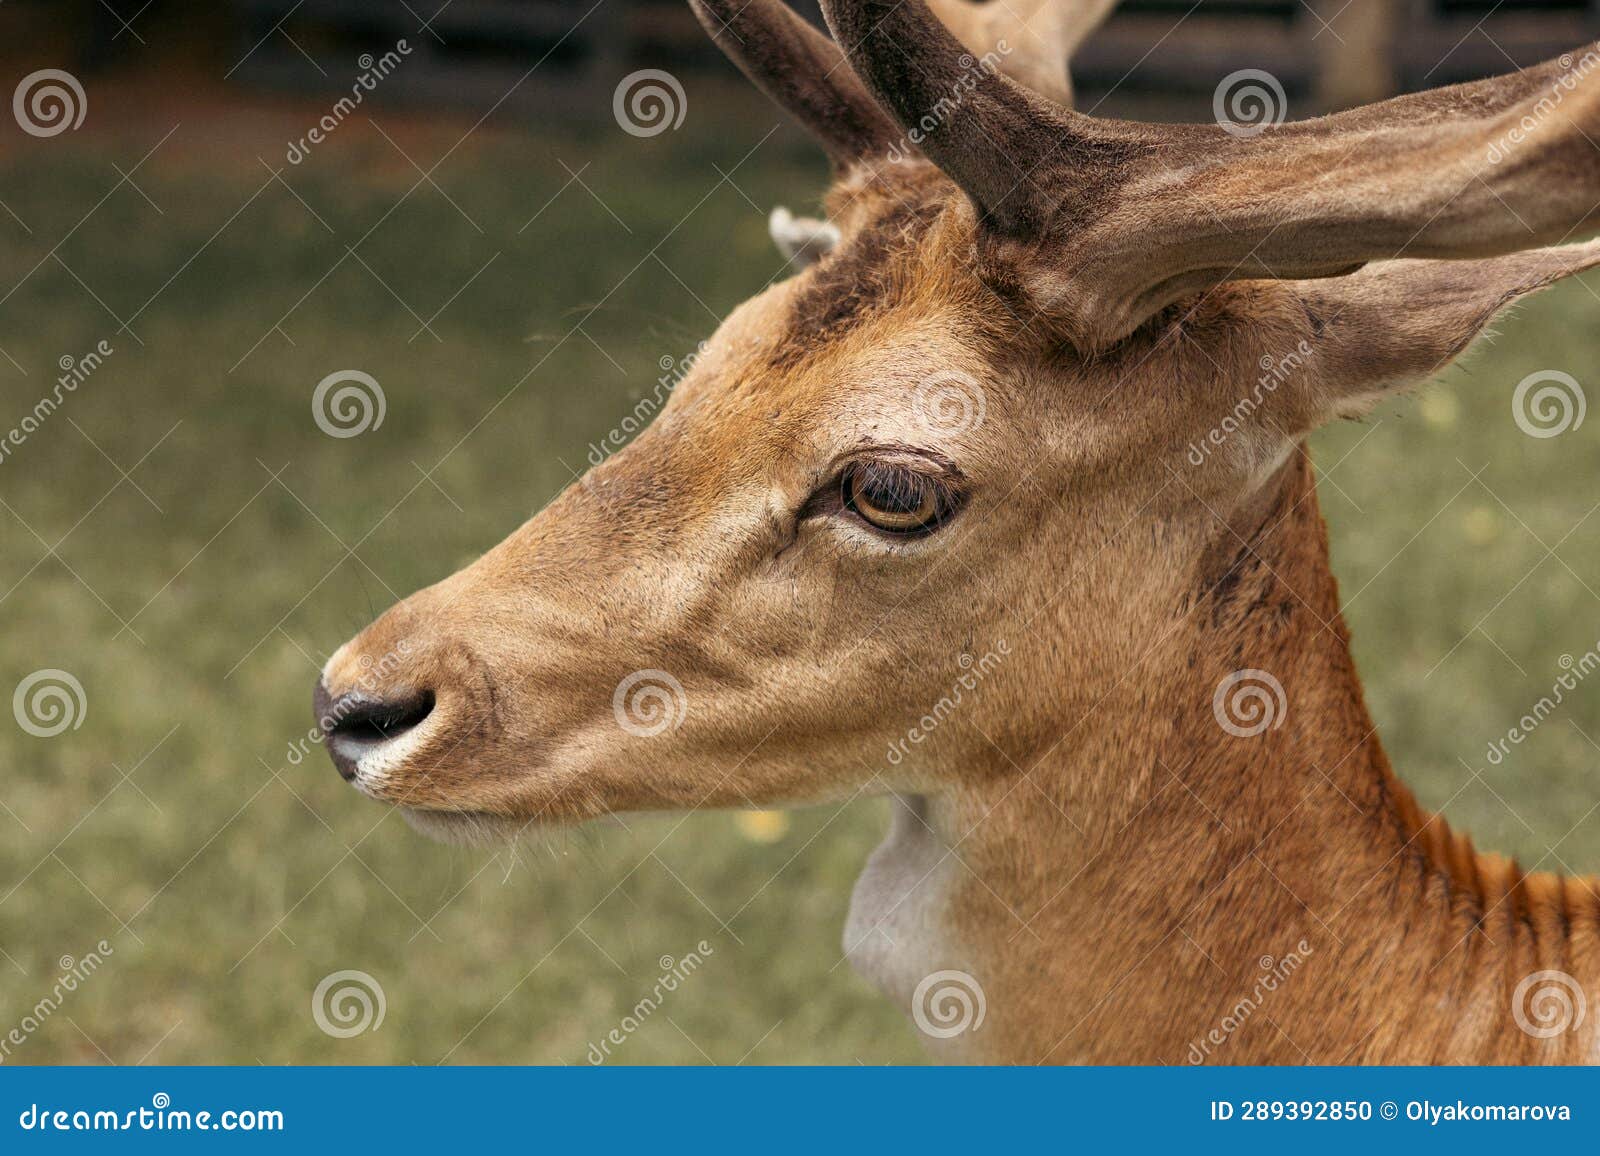 head close-up of a fallow deer against green background